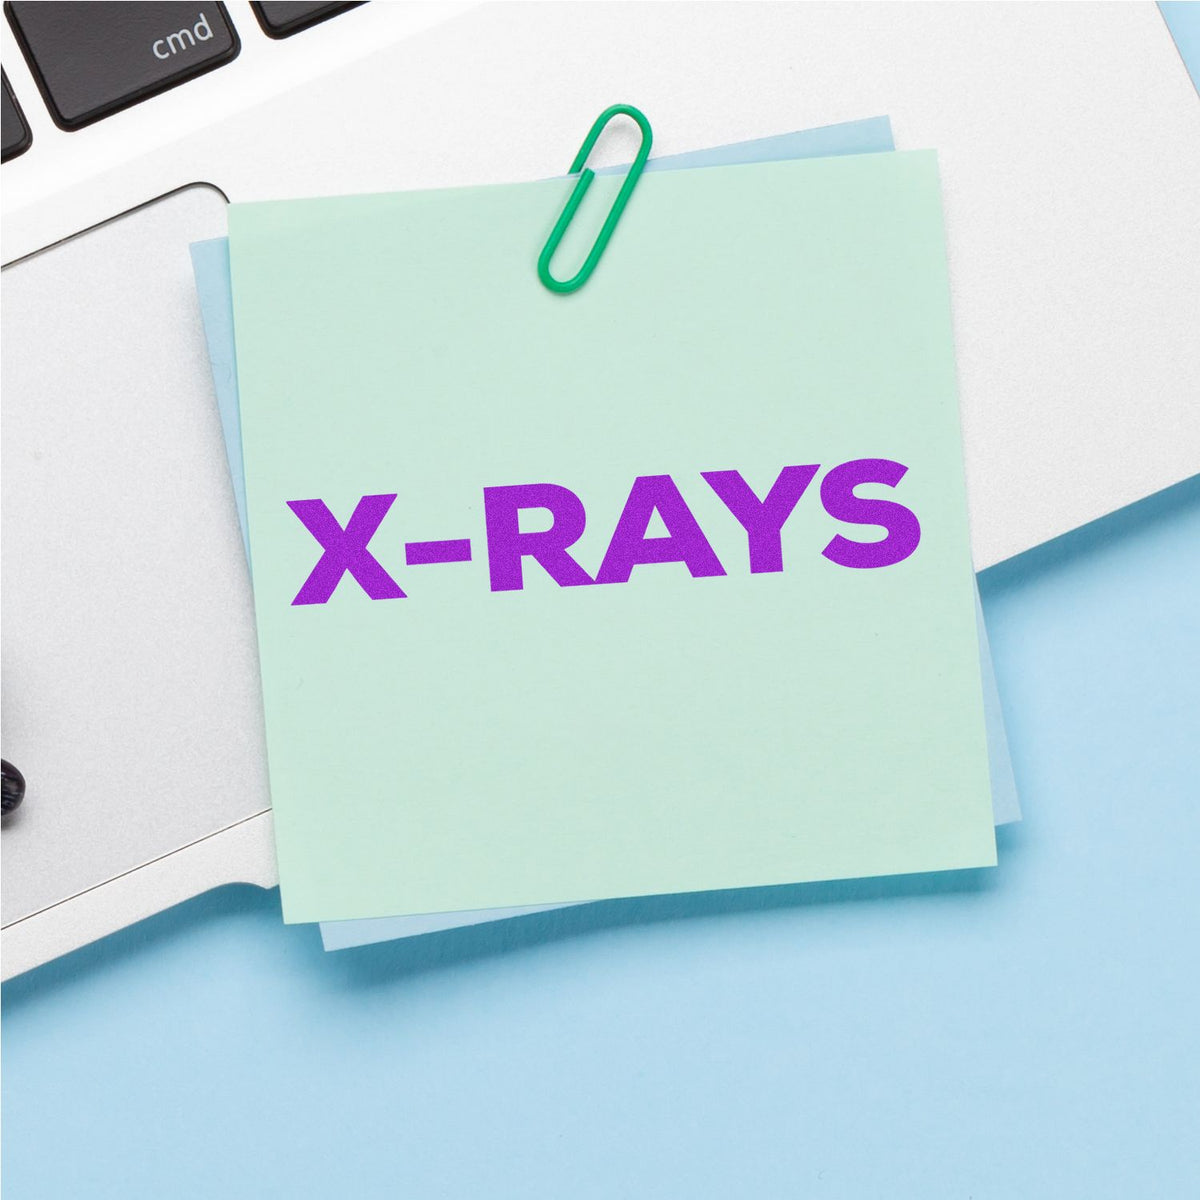 Bold X-Rays Rubber Stamp In Use